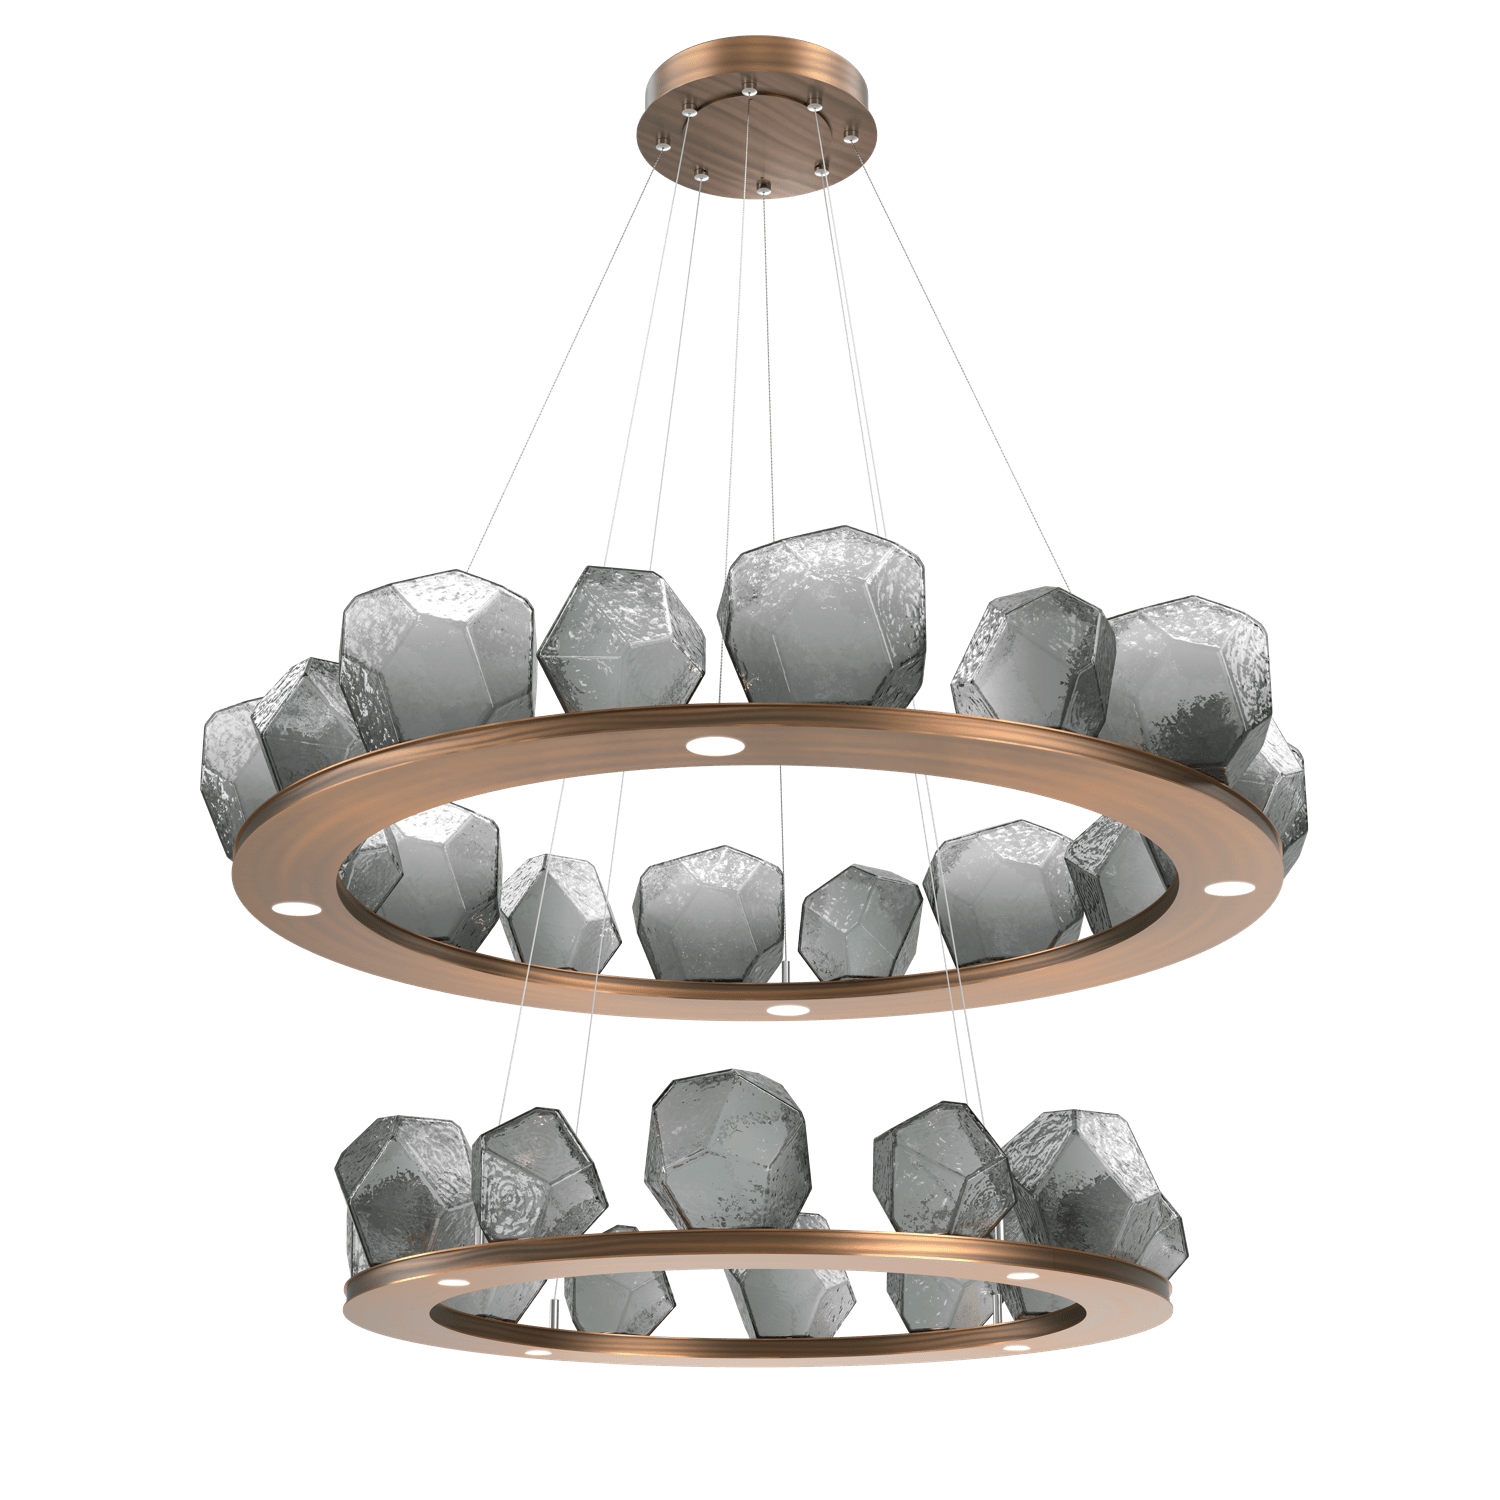 CHB0039-2B-RB-S-Hammerton-Studio-Gem-48-inch-two-tier-ring-chandelier-with-oil-rubbed-bronze-finish-and-smoke-blown-glass-shades-and-LED-lamping